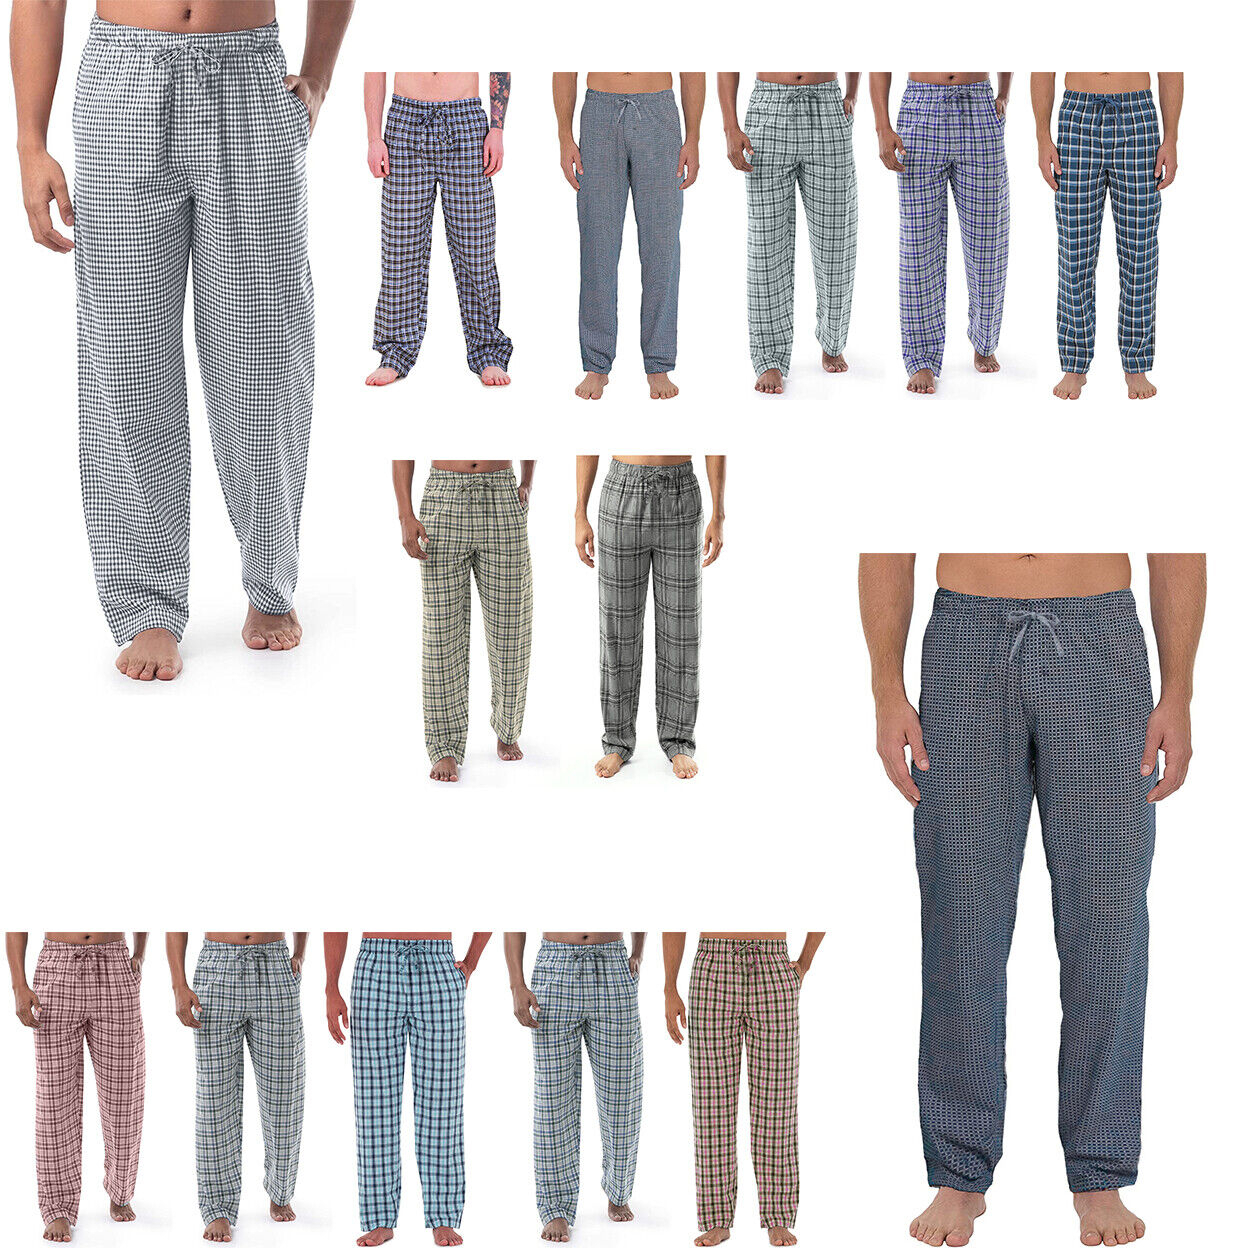 Multi-Pack: Men's Ultra-Soft Solid & Plaid Cotton Jersey Knit Comfy Sleep Lounge Pajama Pants - 1-pack Solid, Medium